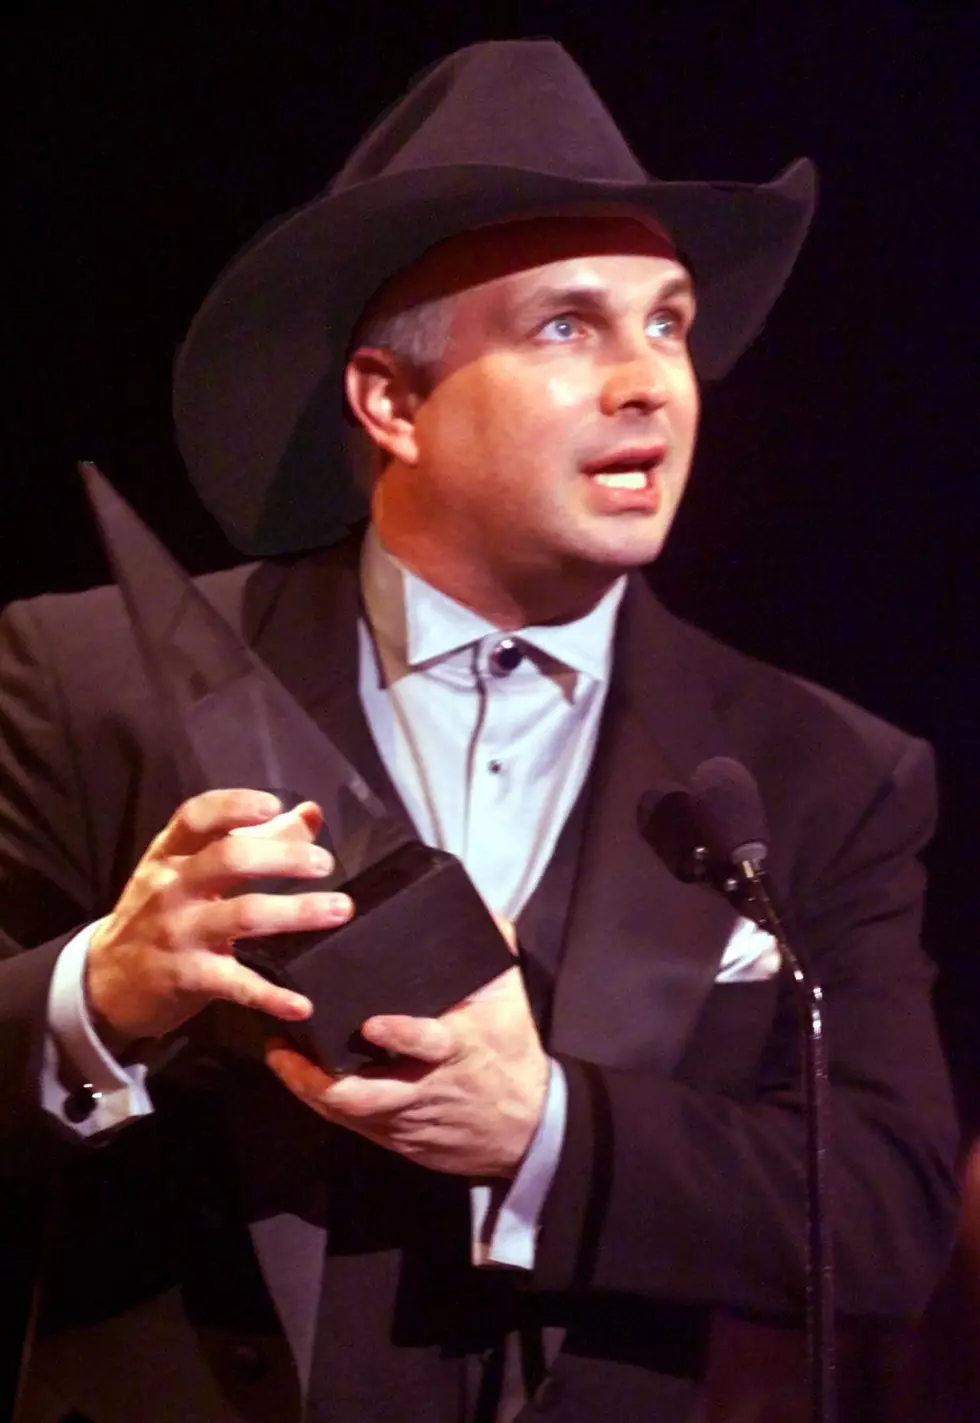 [WIN] Garth Brooks: The First Five Years Part 1